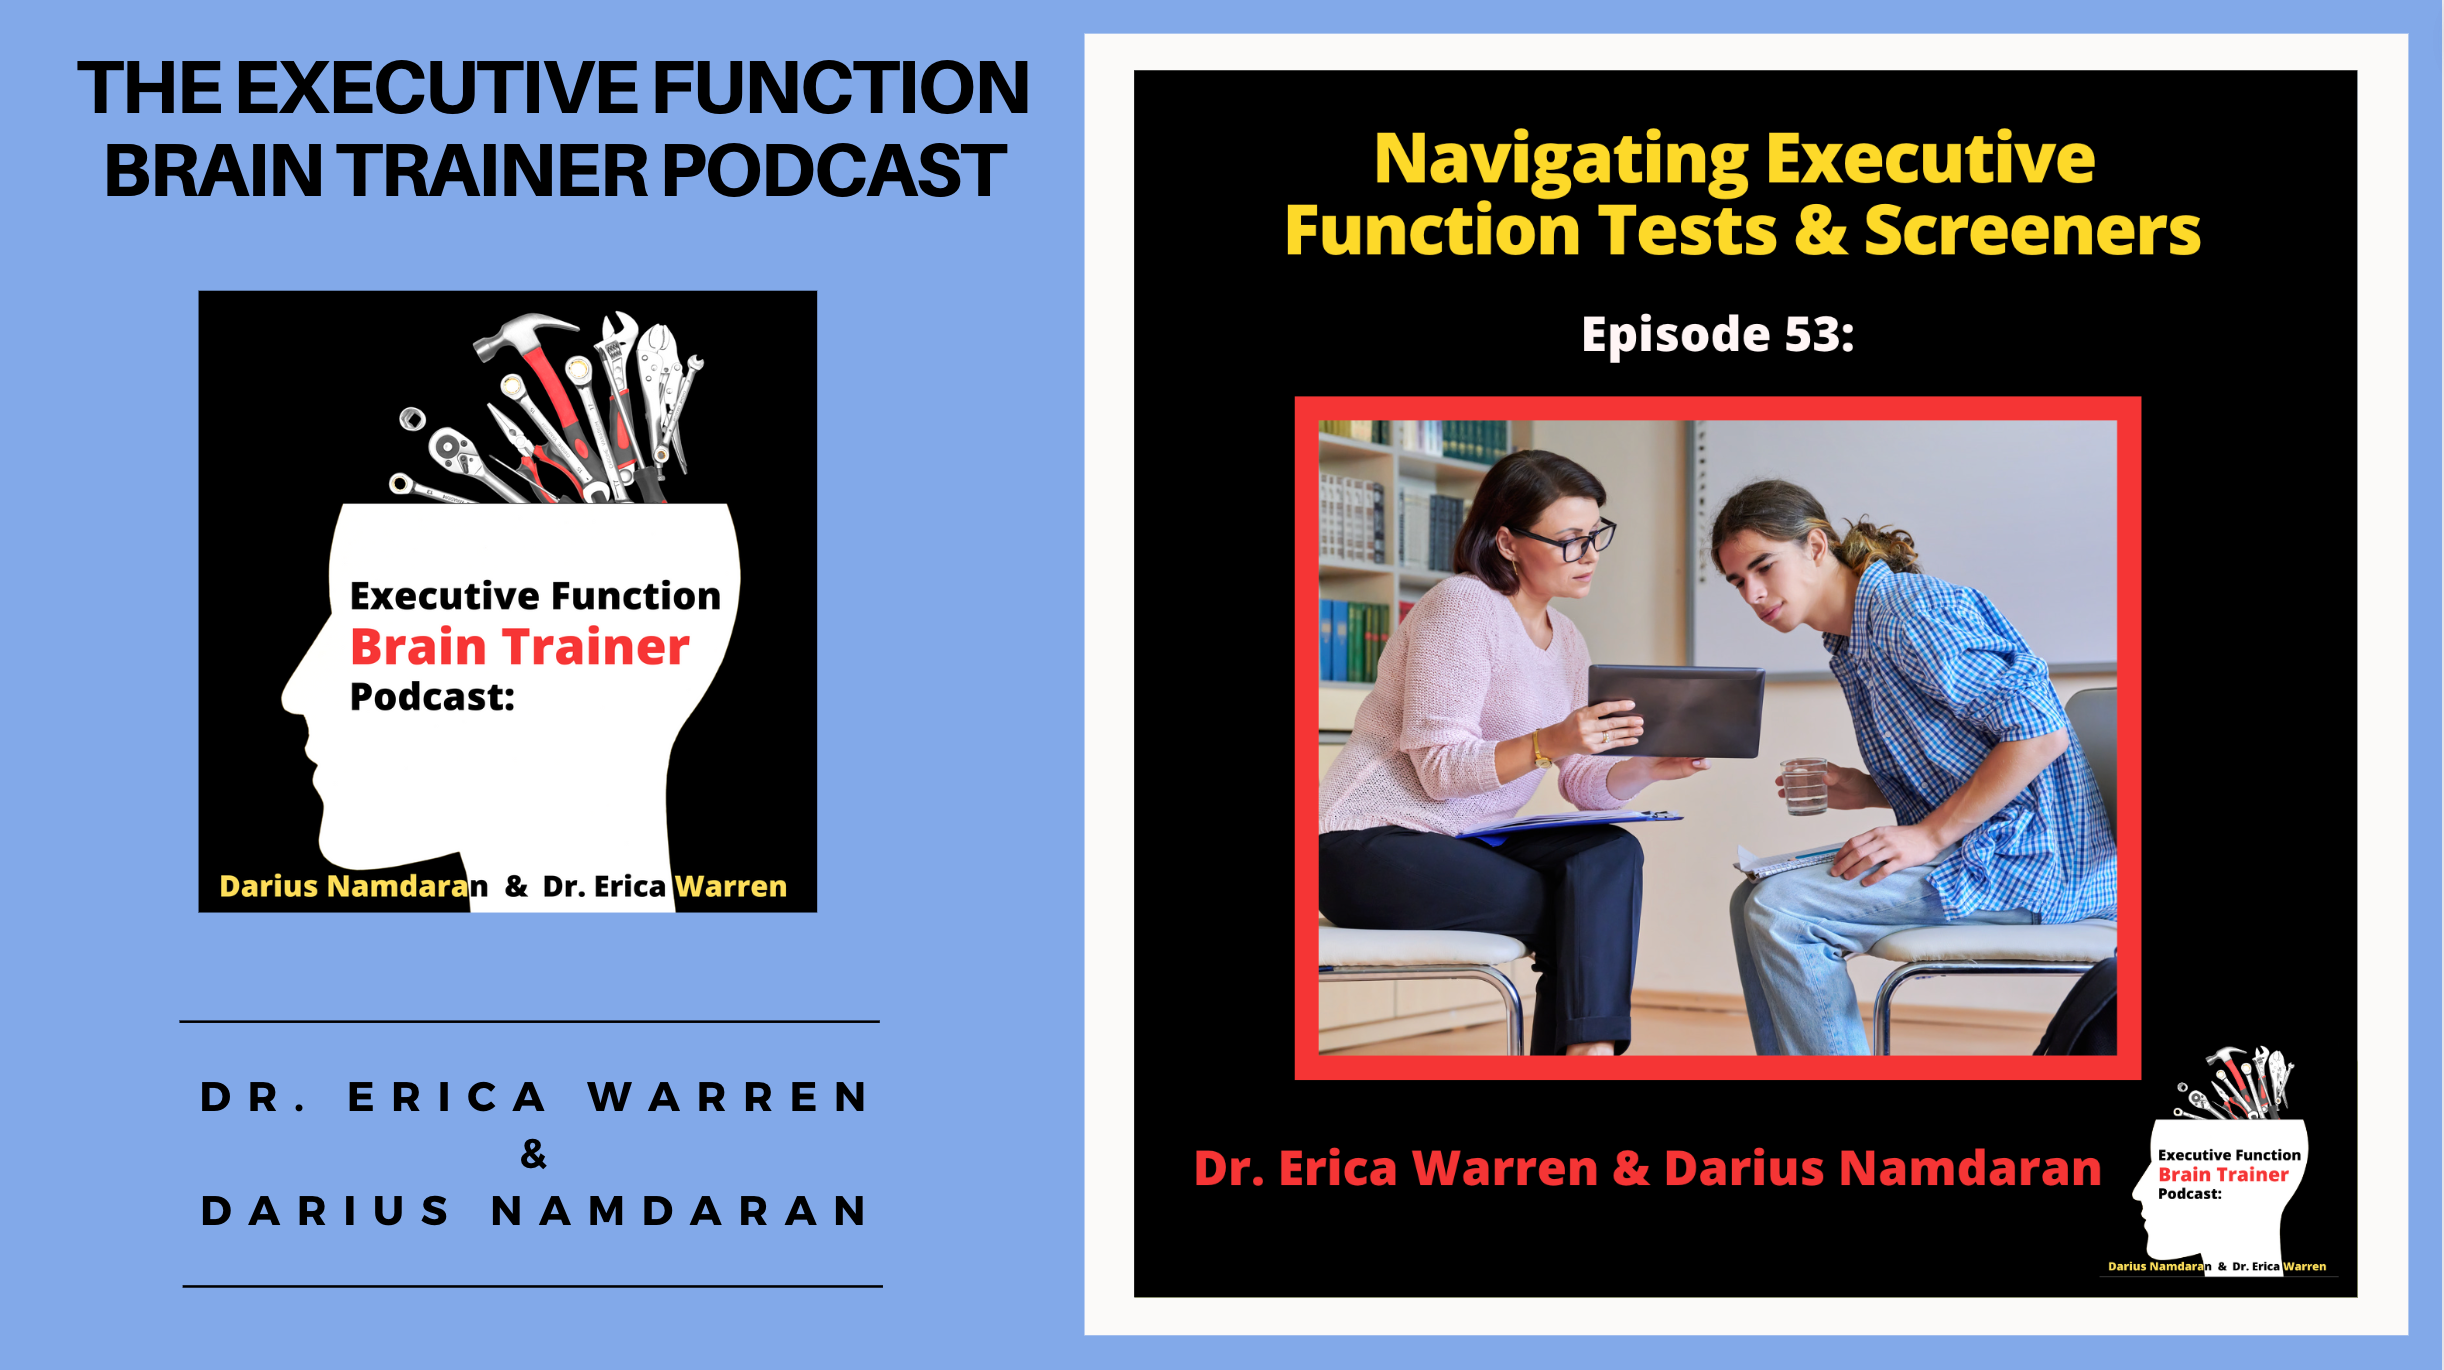 Episode 53 of the Executive Function Brain Trainer Podcast